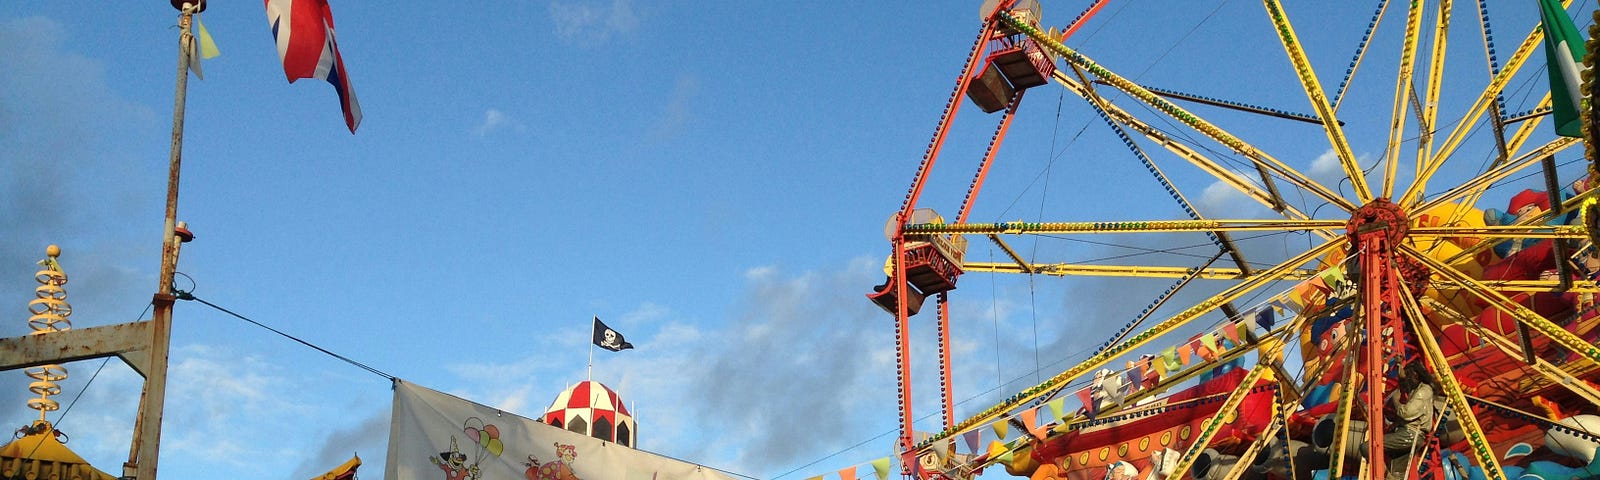 Picture of rides in the kiddy park.